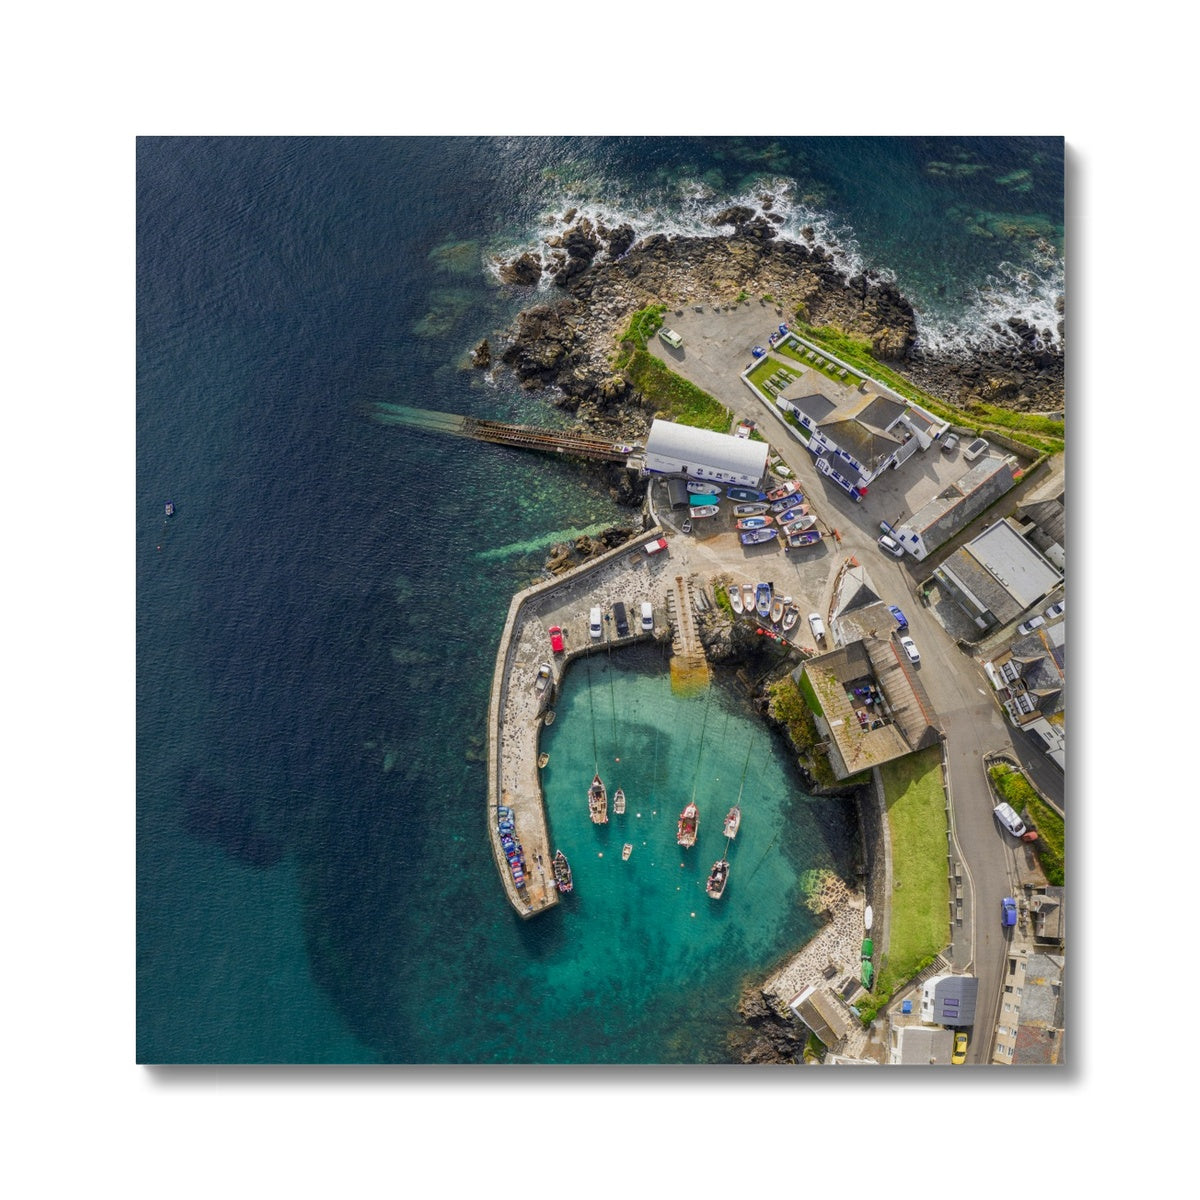 coverack from above